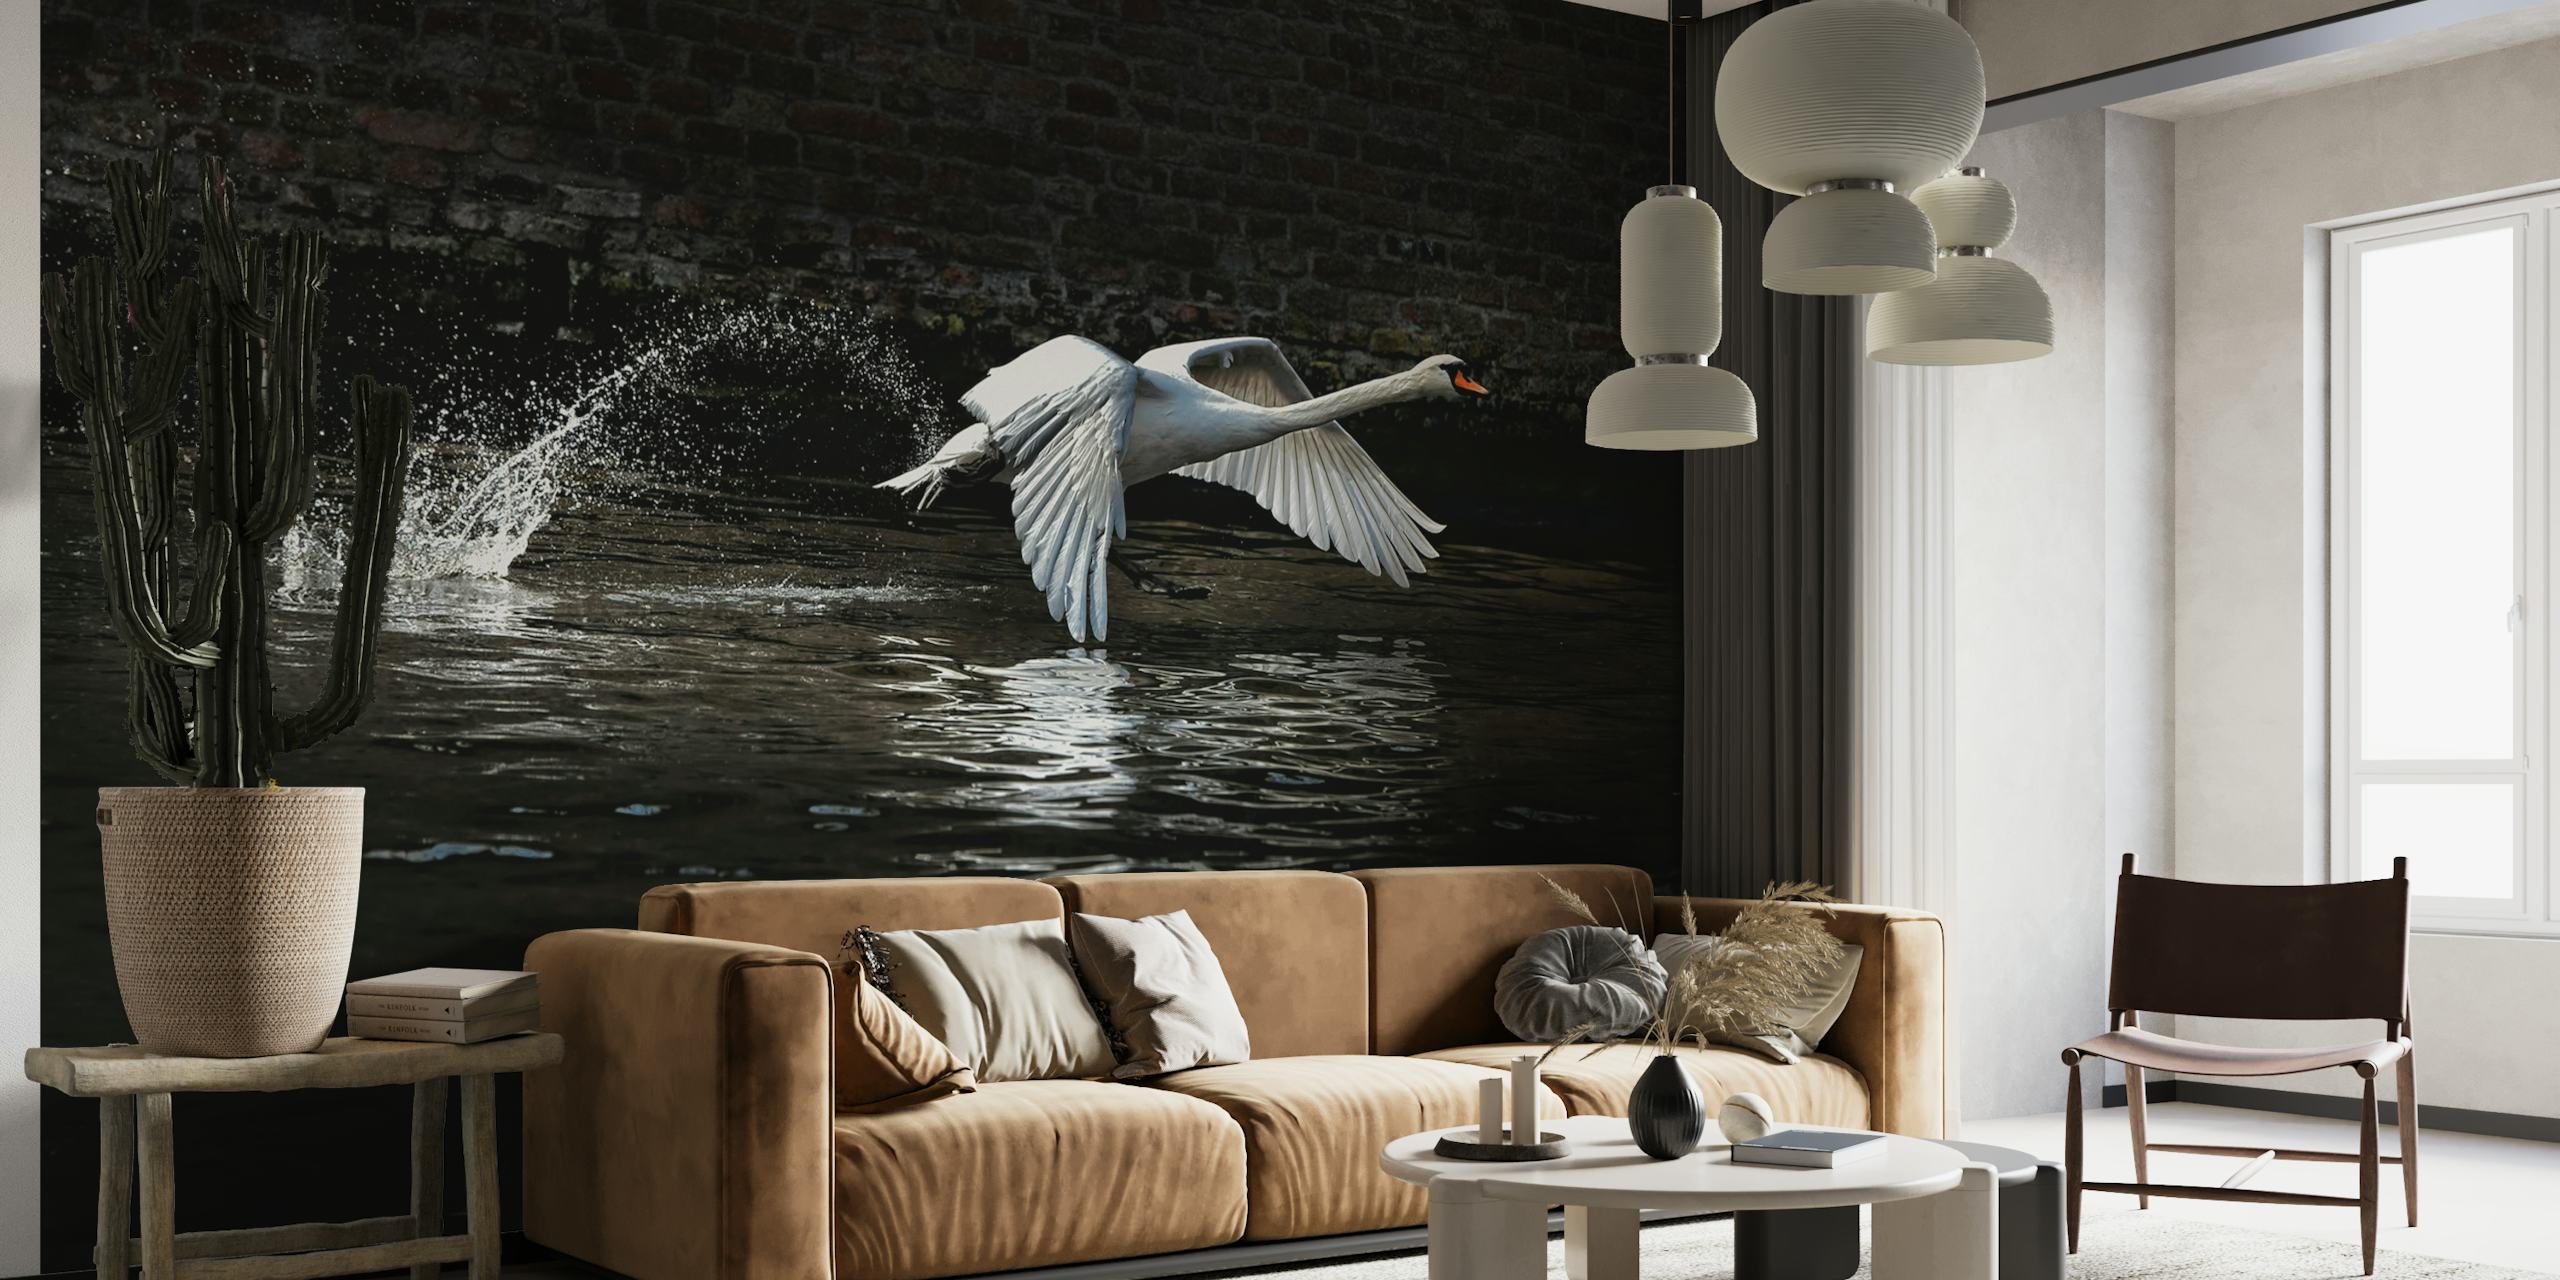 Swan taking off from water wall mural